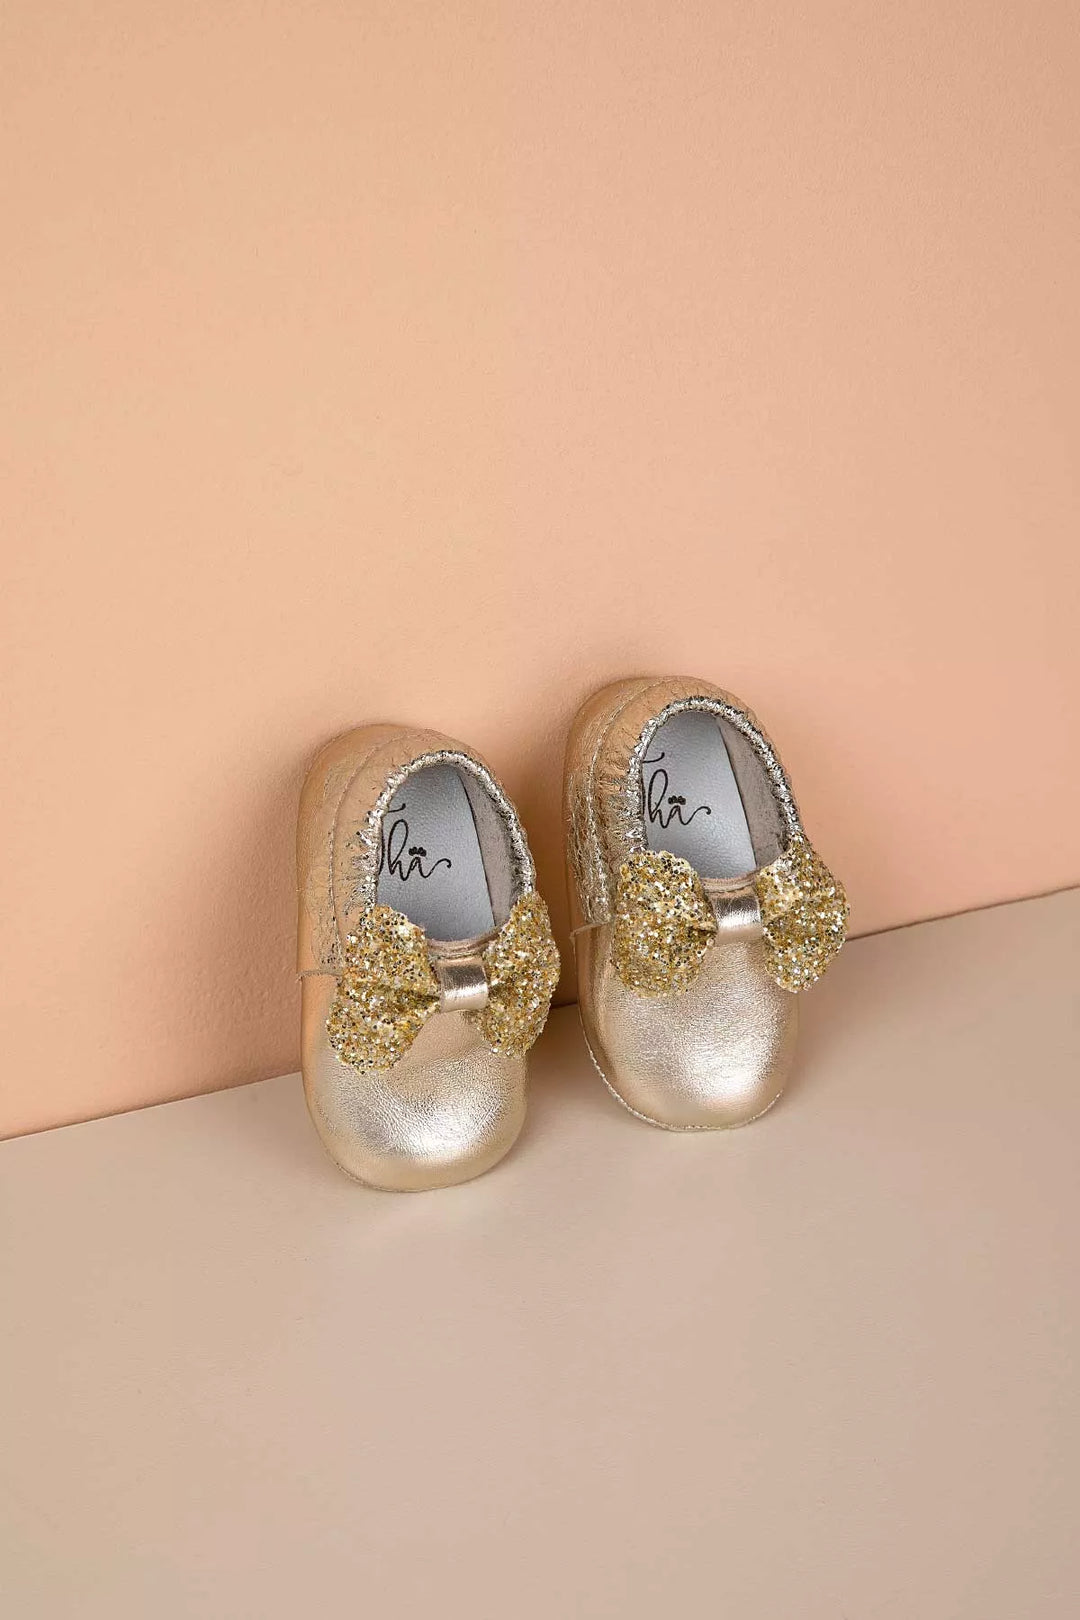 Yellow baby shoes that have glitter bow tie.